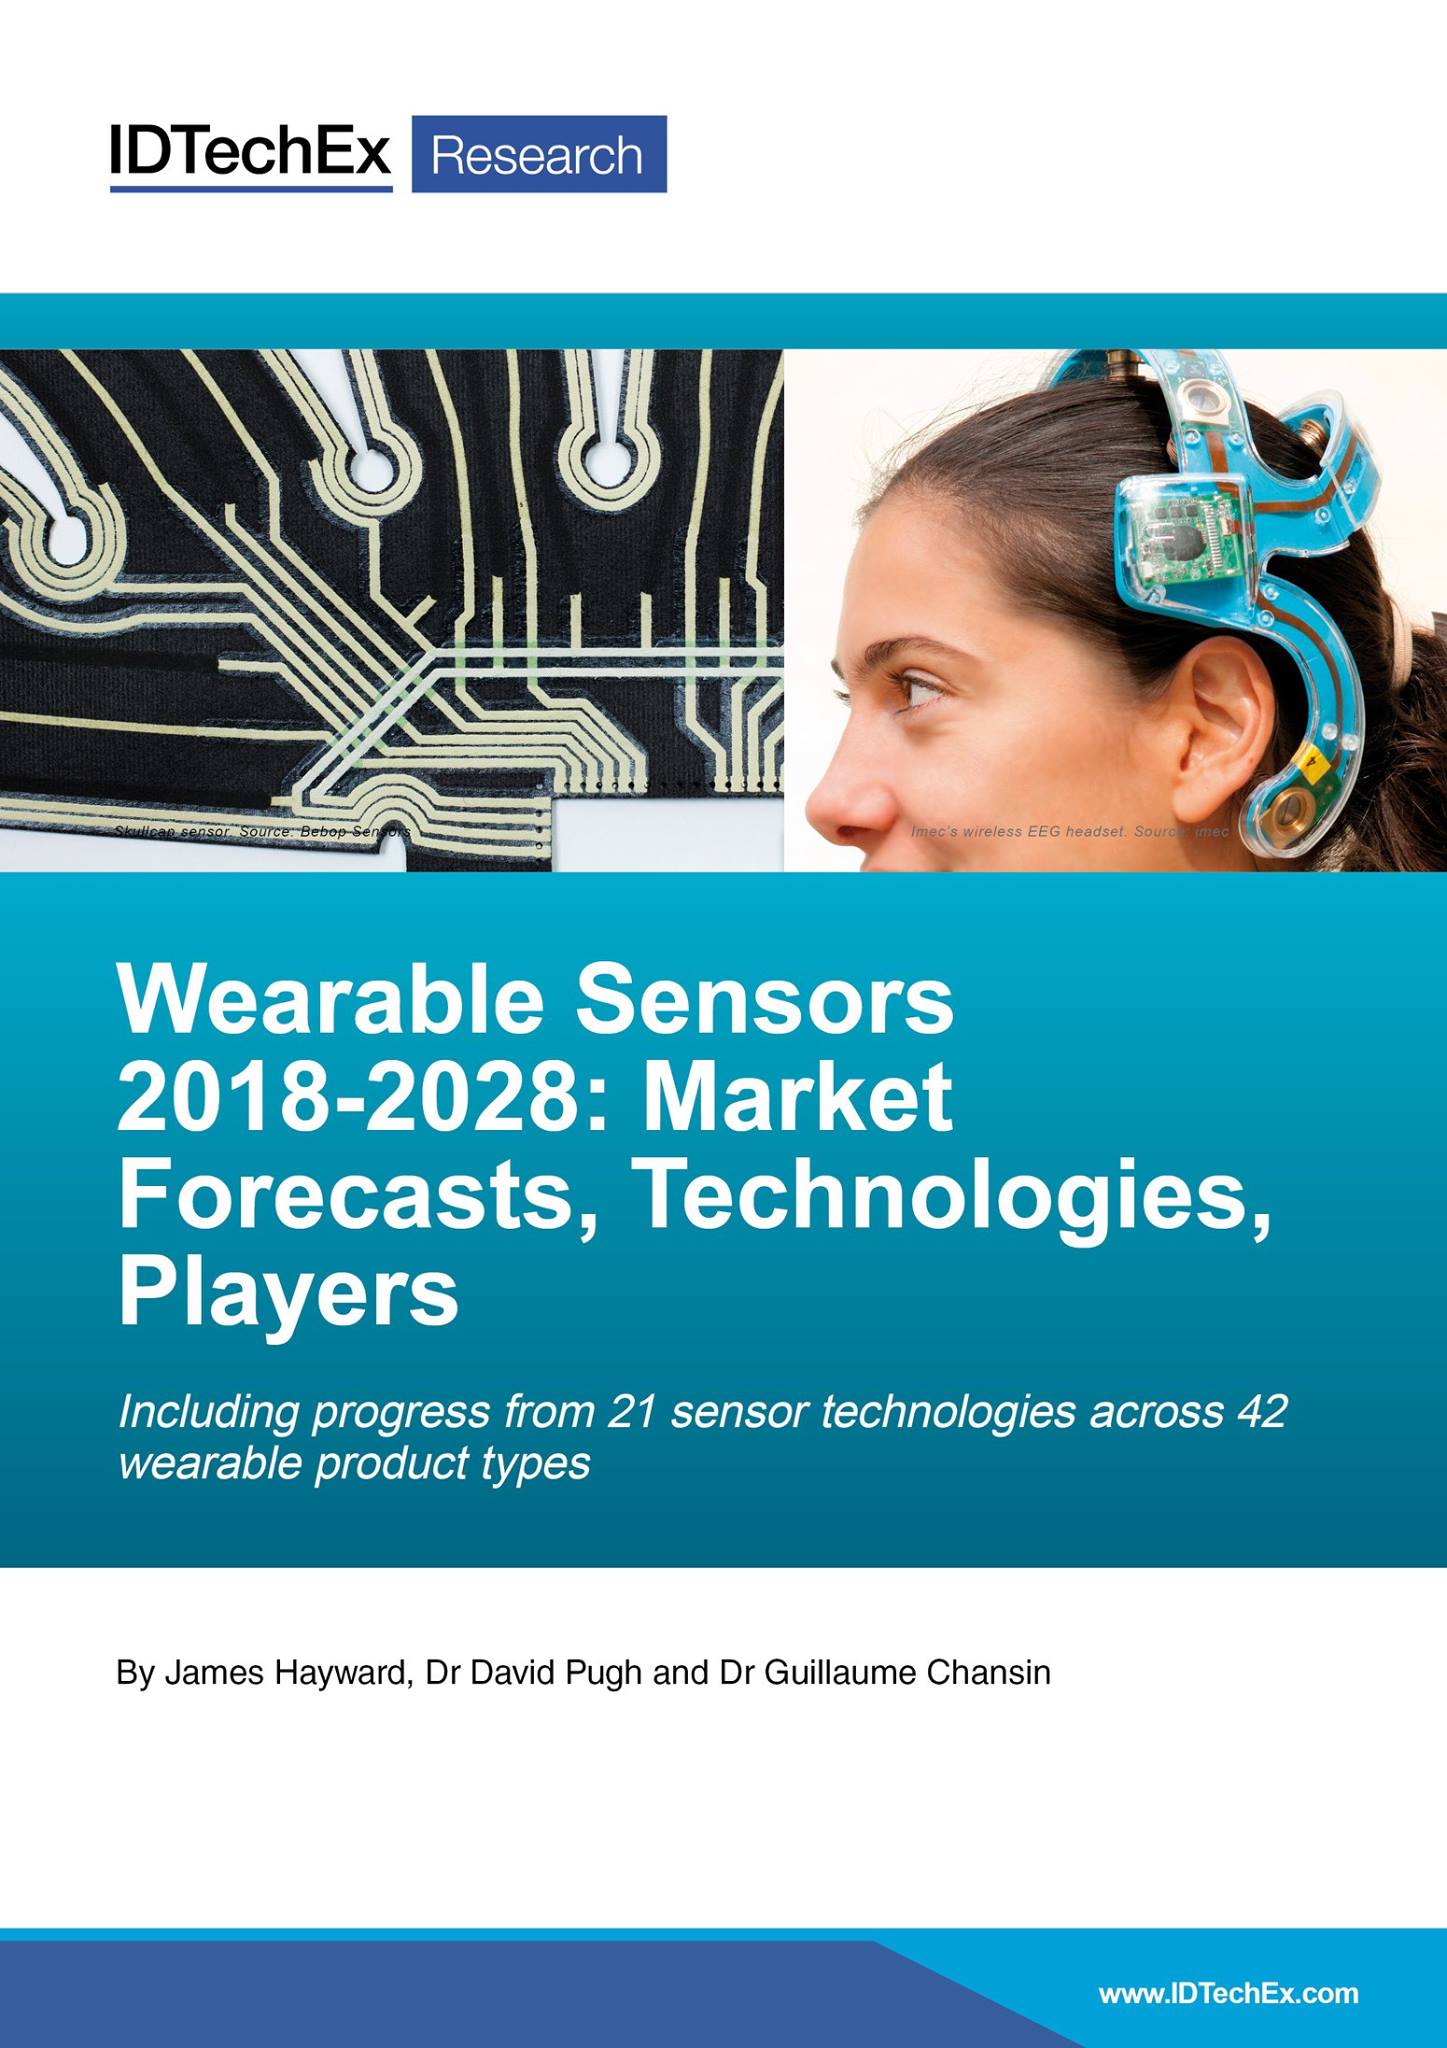 Wearable sensors reach their first billion-dollar year, with growth coming in three waves